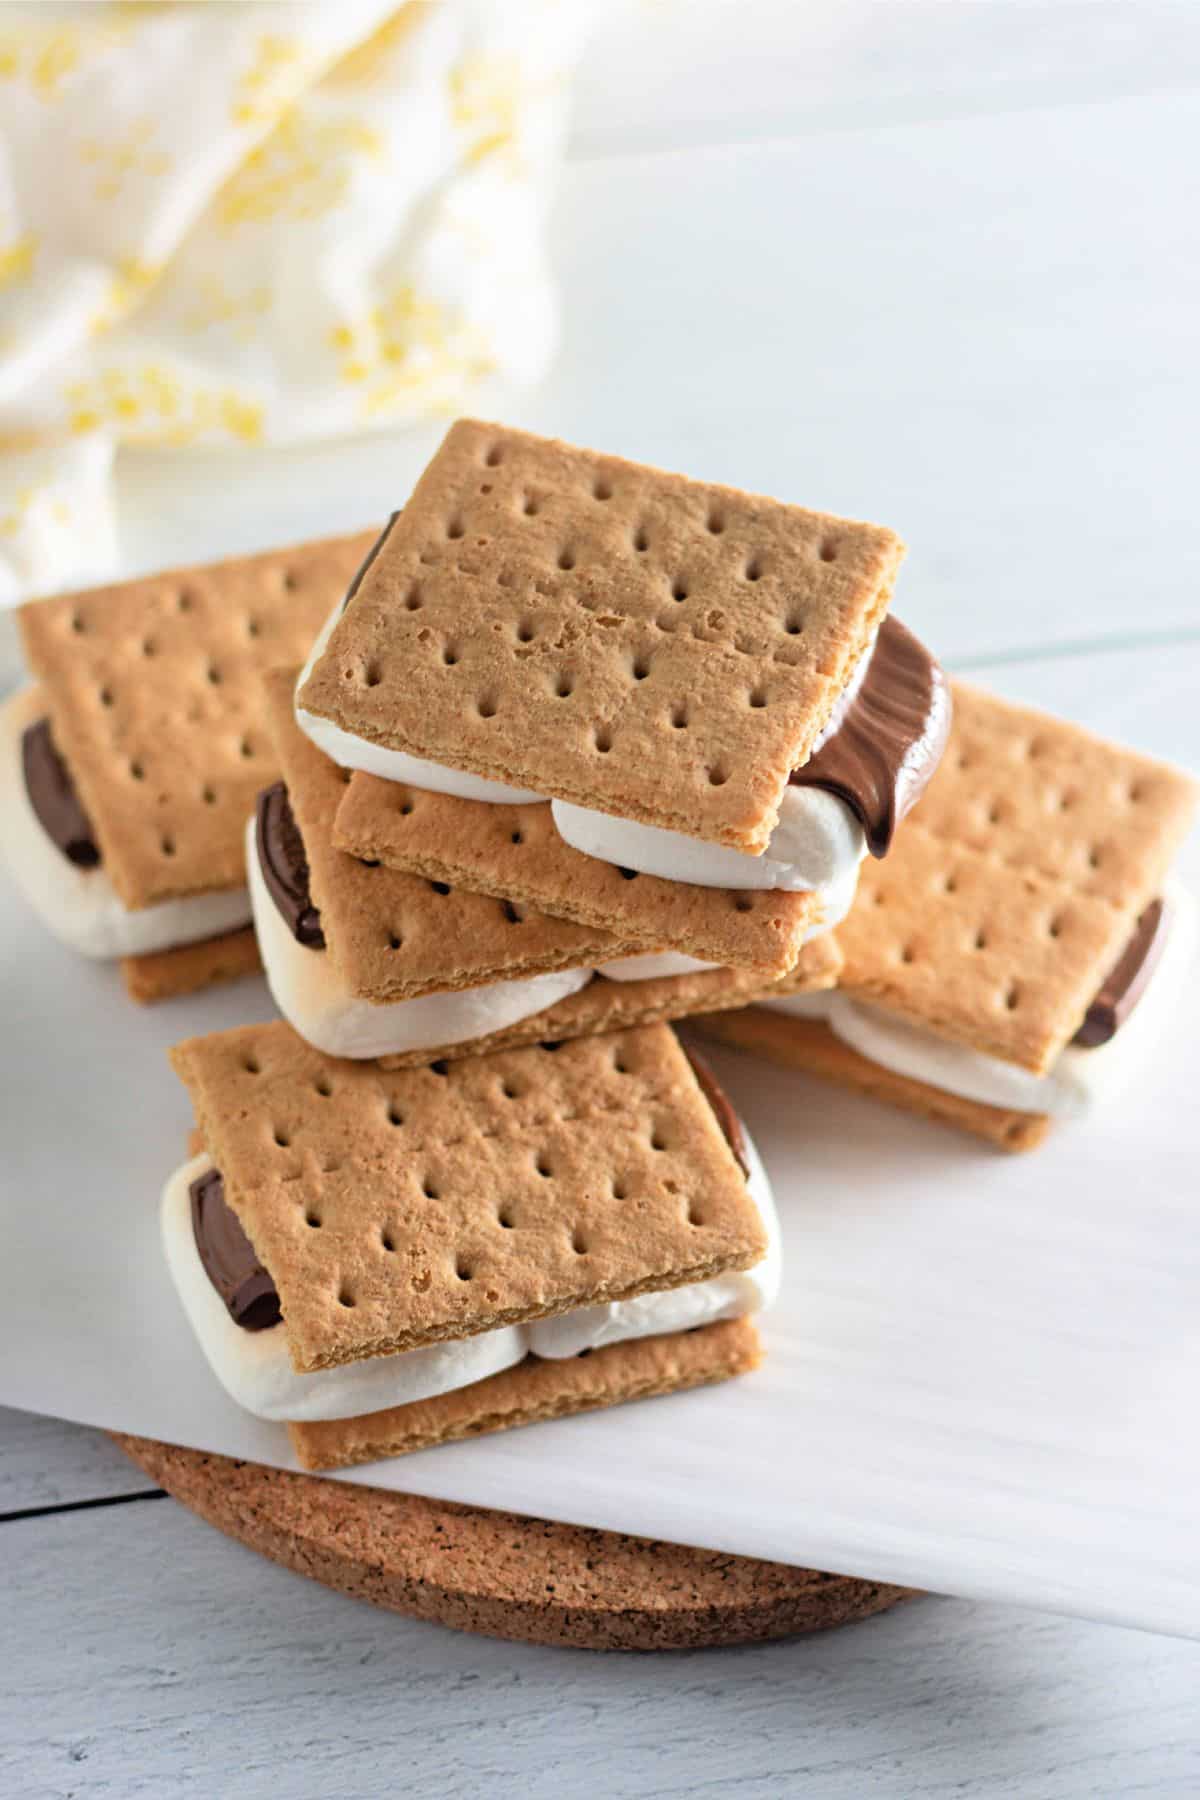 A stack of smores on parchment paper.